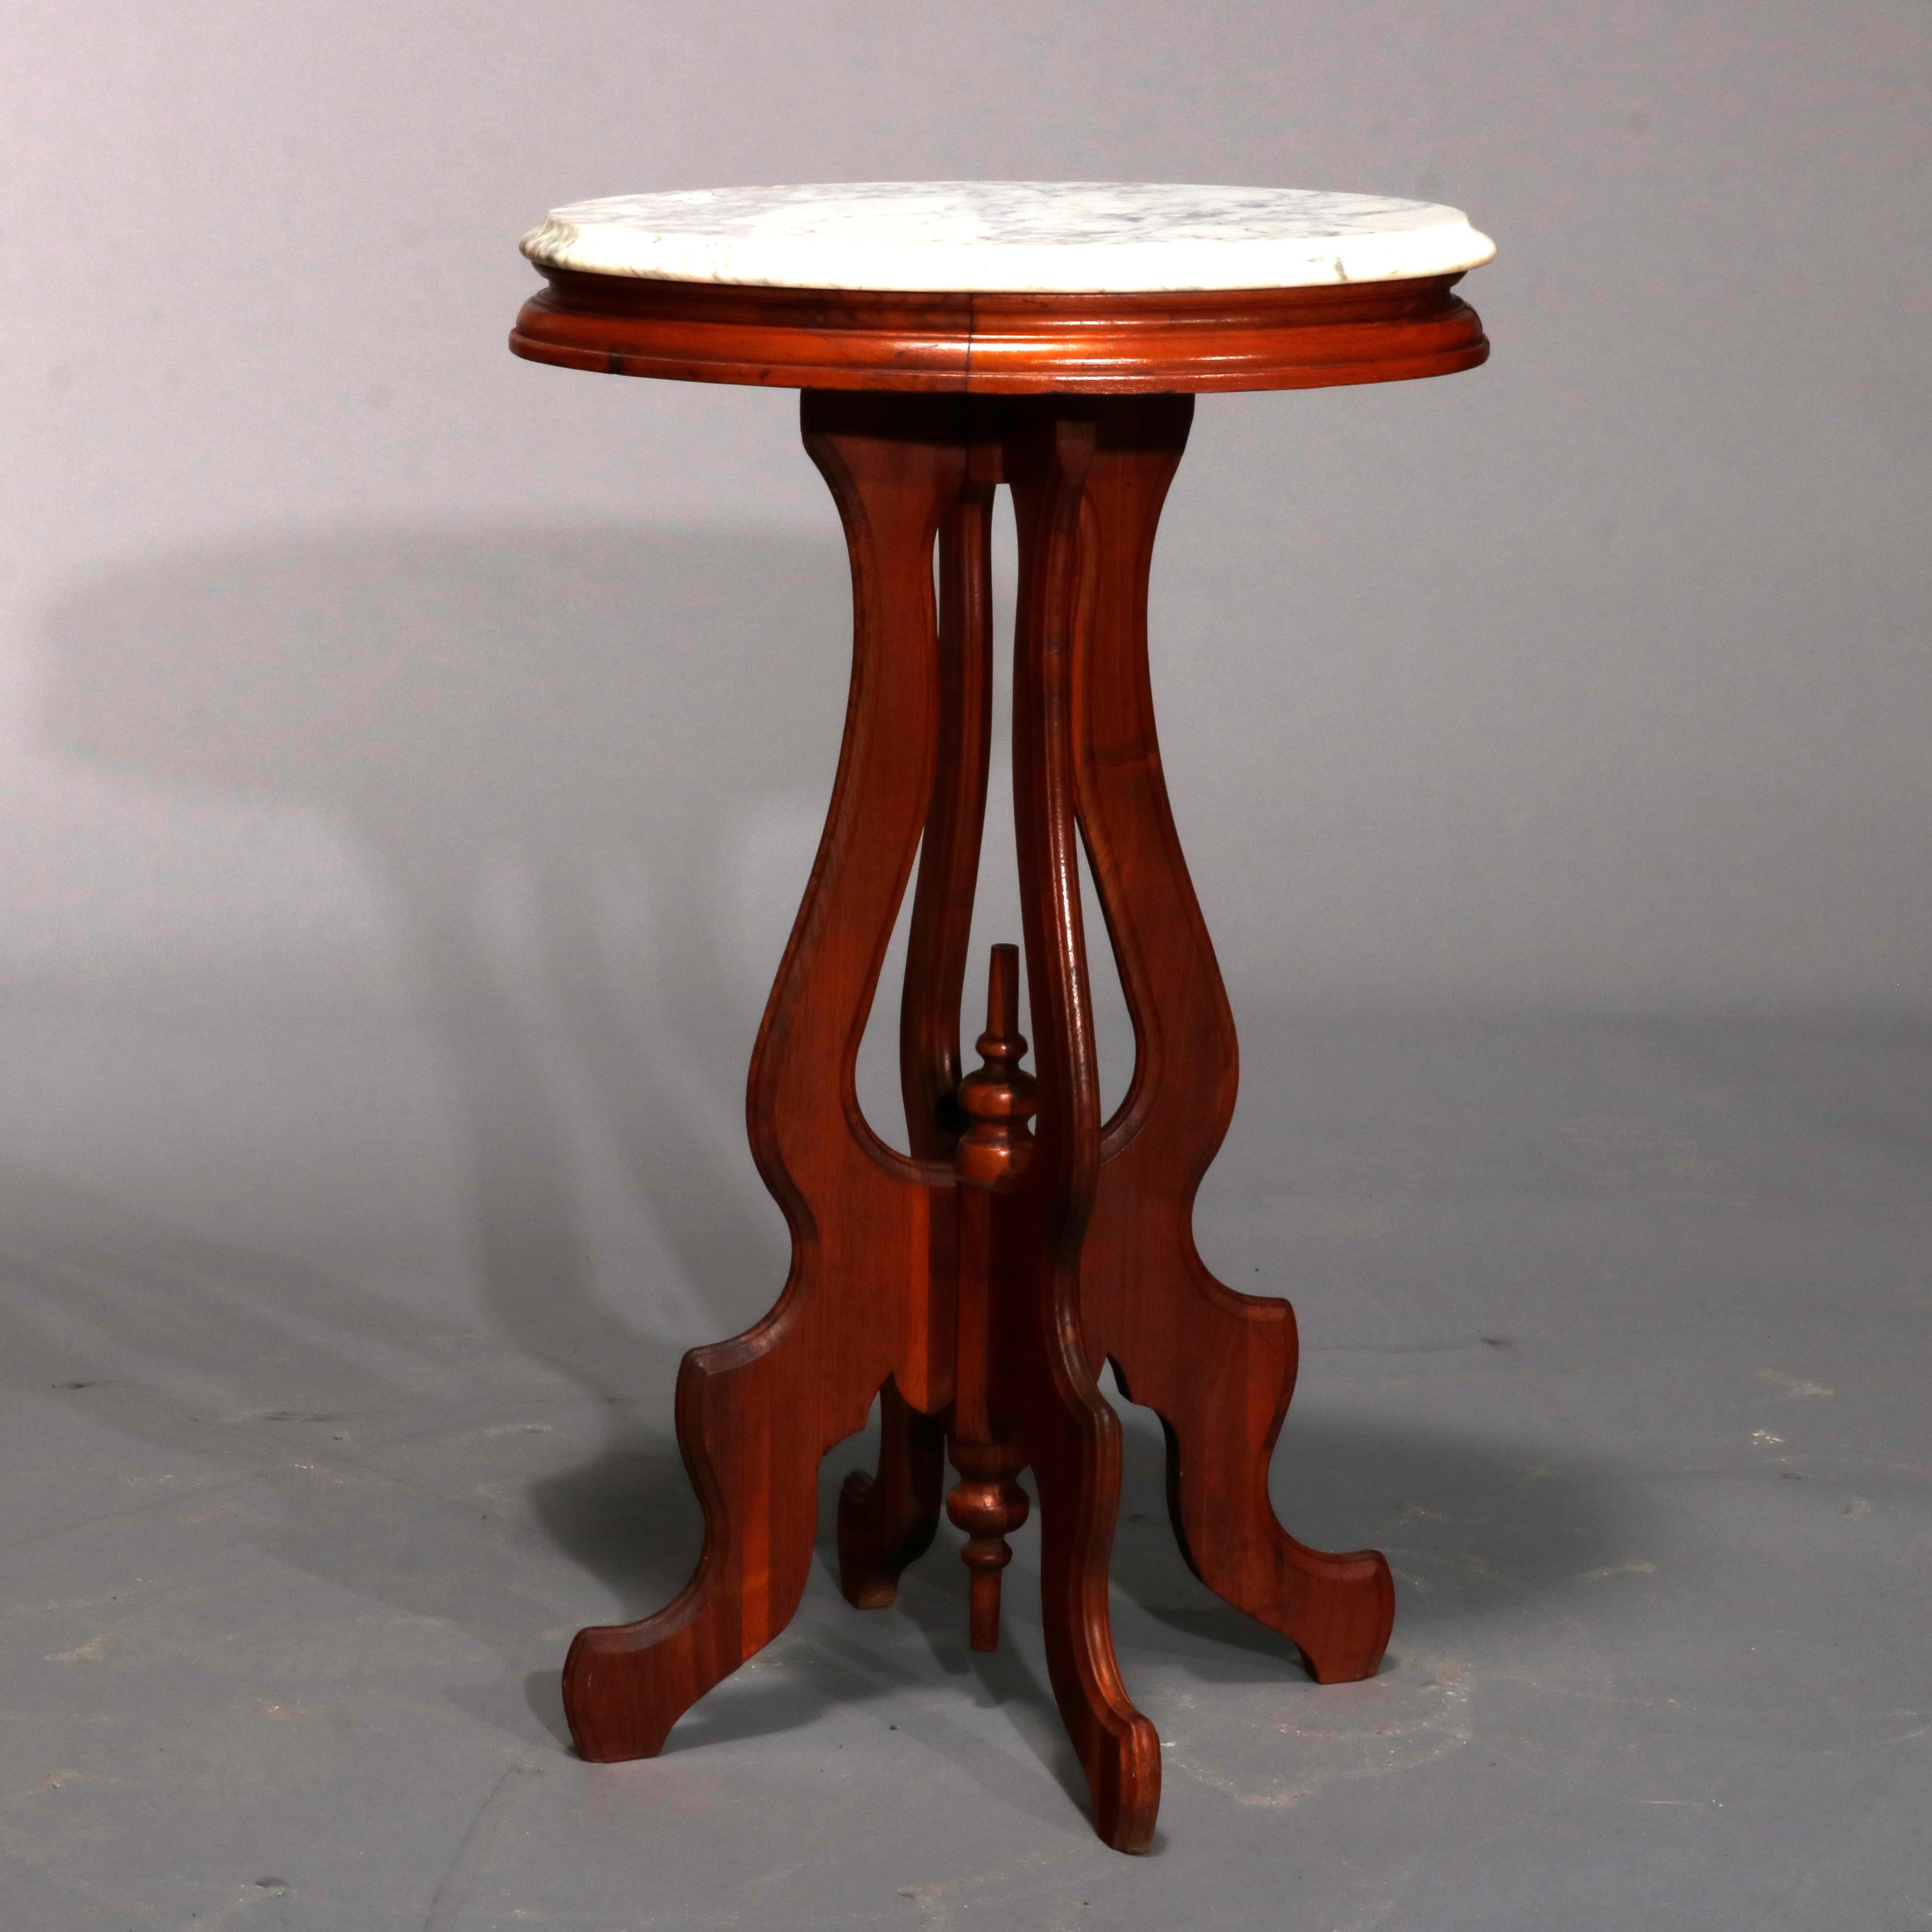 An antique Victorian plant stand offers oval and beveled marble top surmounting carved walnut stand with s-scroll legs having central finial and raised on cabriole legs, circa 1900.

Measures- 29